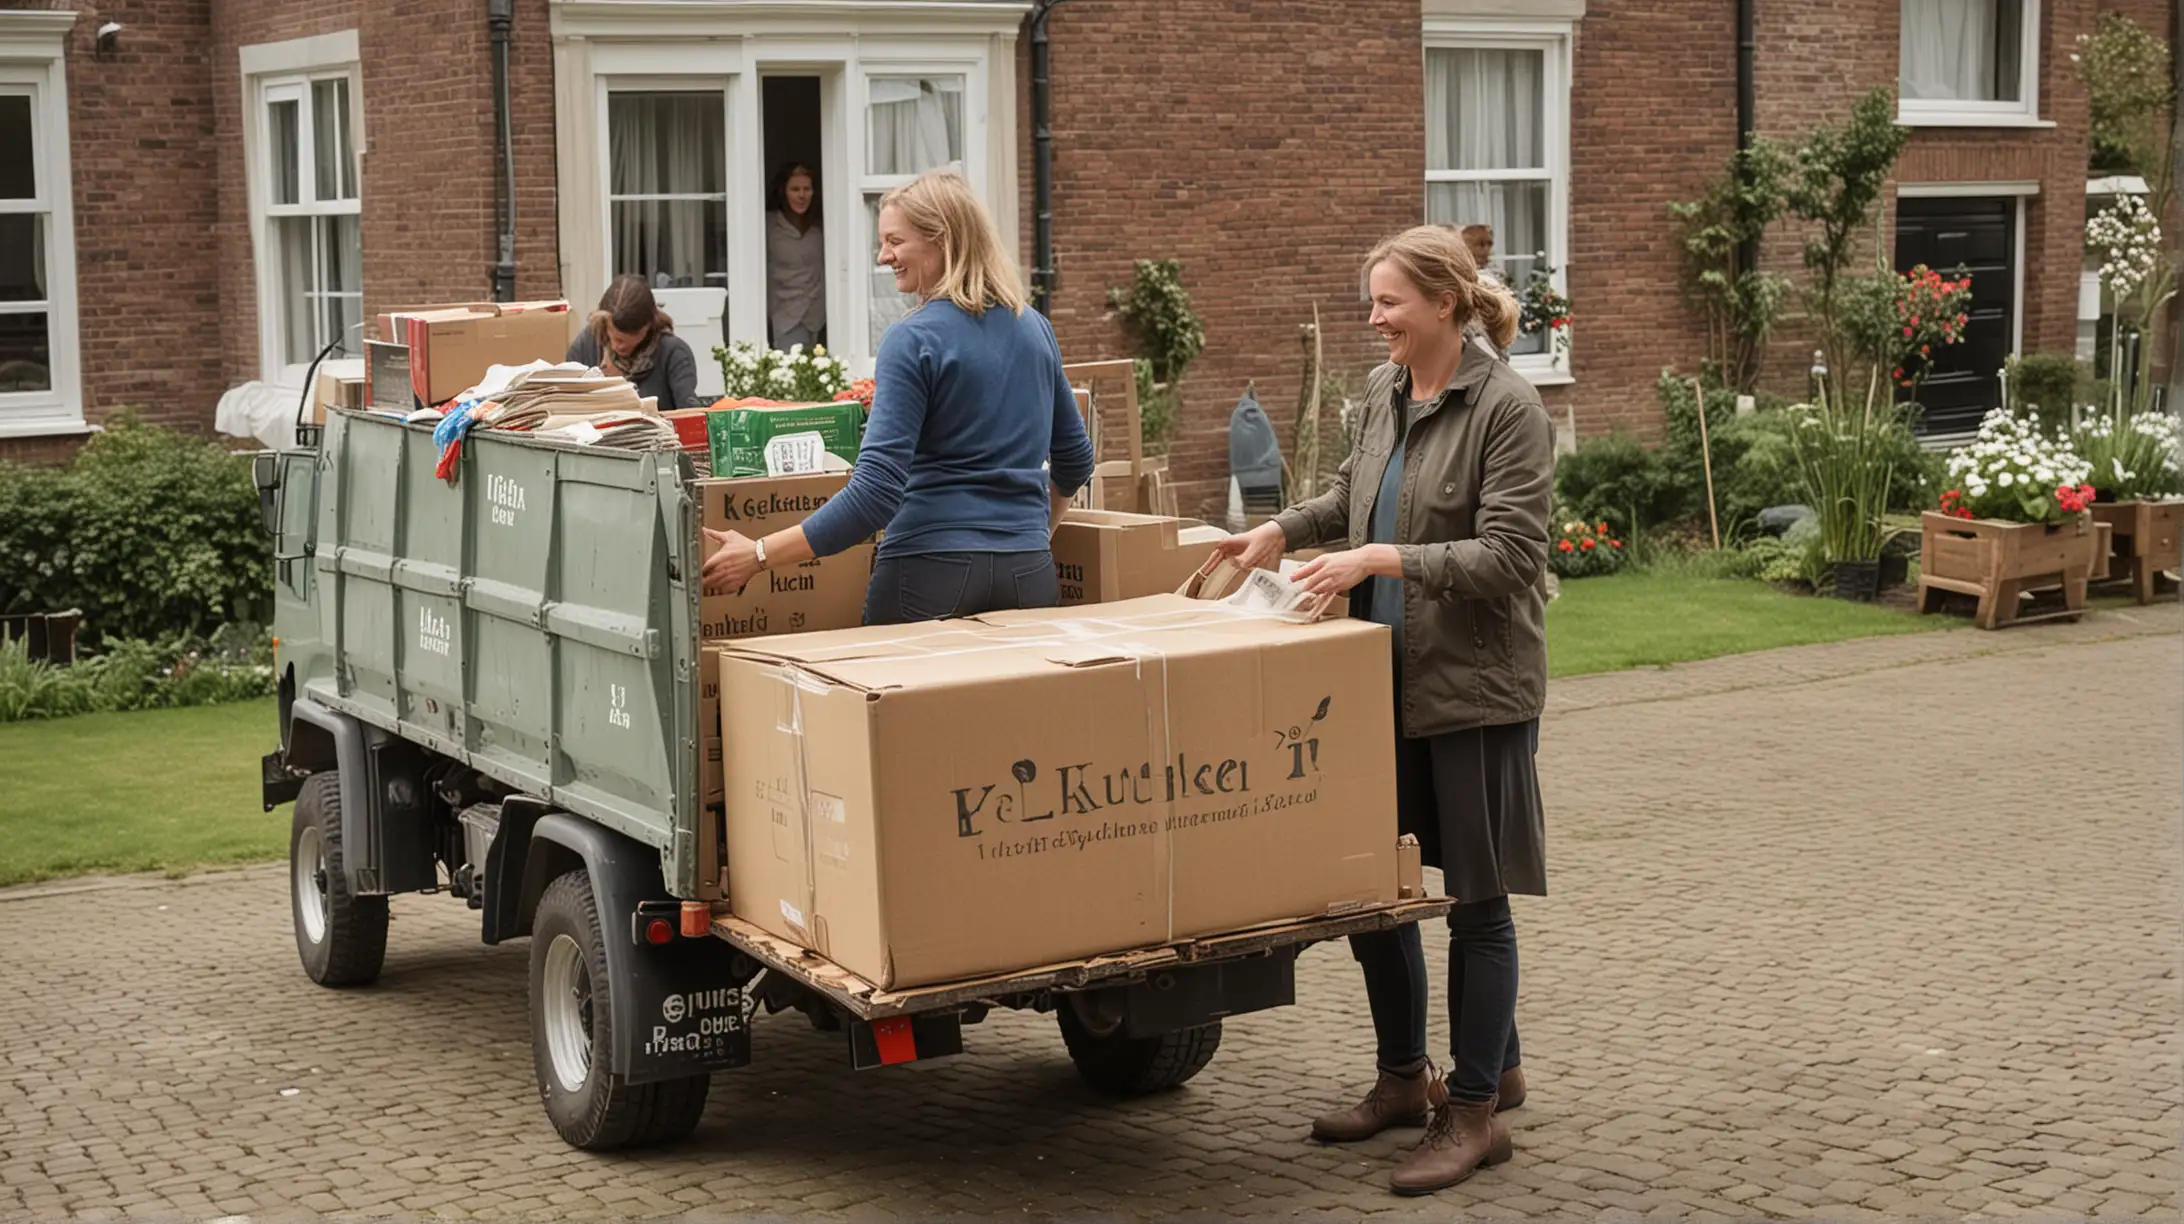 A Dutch couple joyfully loads sealed and labeled boxes into a moving truck outside their traditional home. Each box, marked "Keuken" (Kitchen), "Kleding" (Clothing), or "Boeken" (Books), represents a chapter of their shared life. Their smiles reflect excitement for the new beginning ahead.